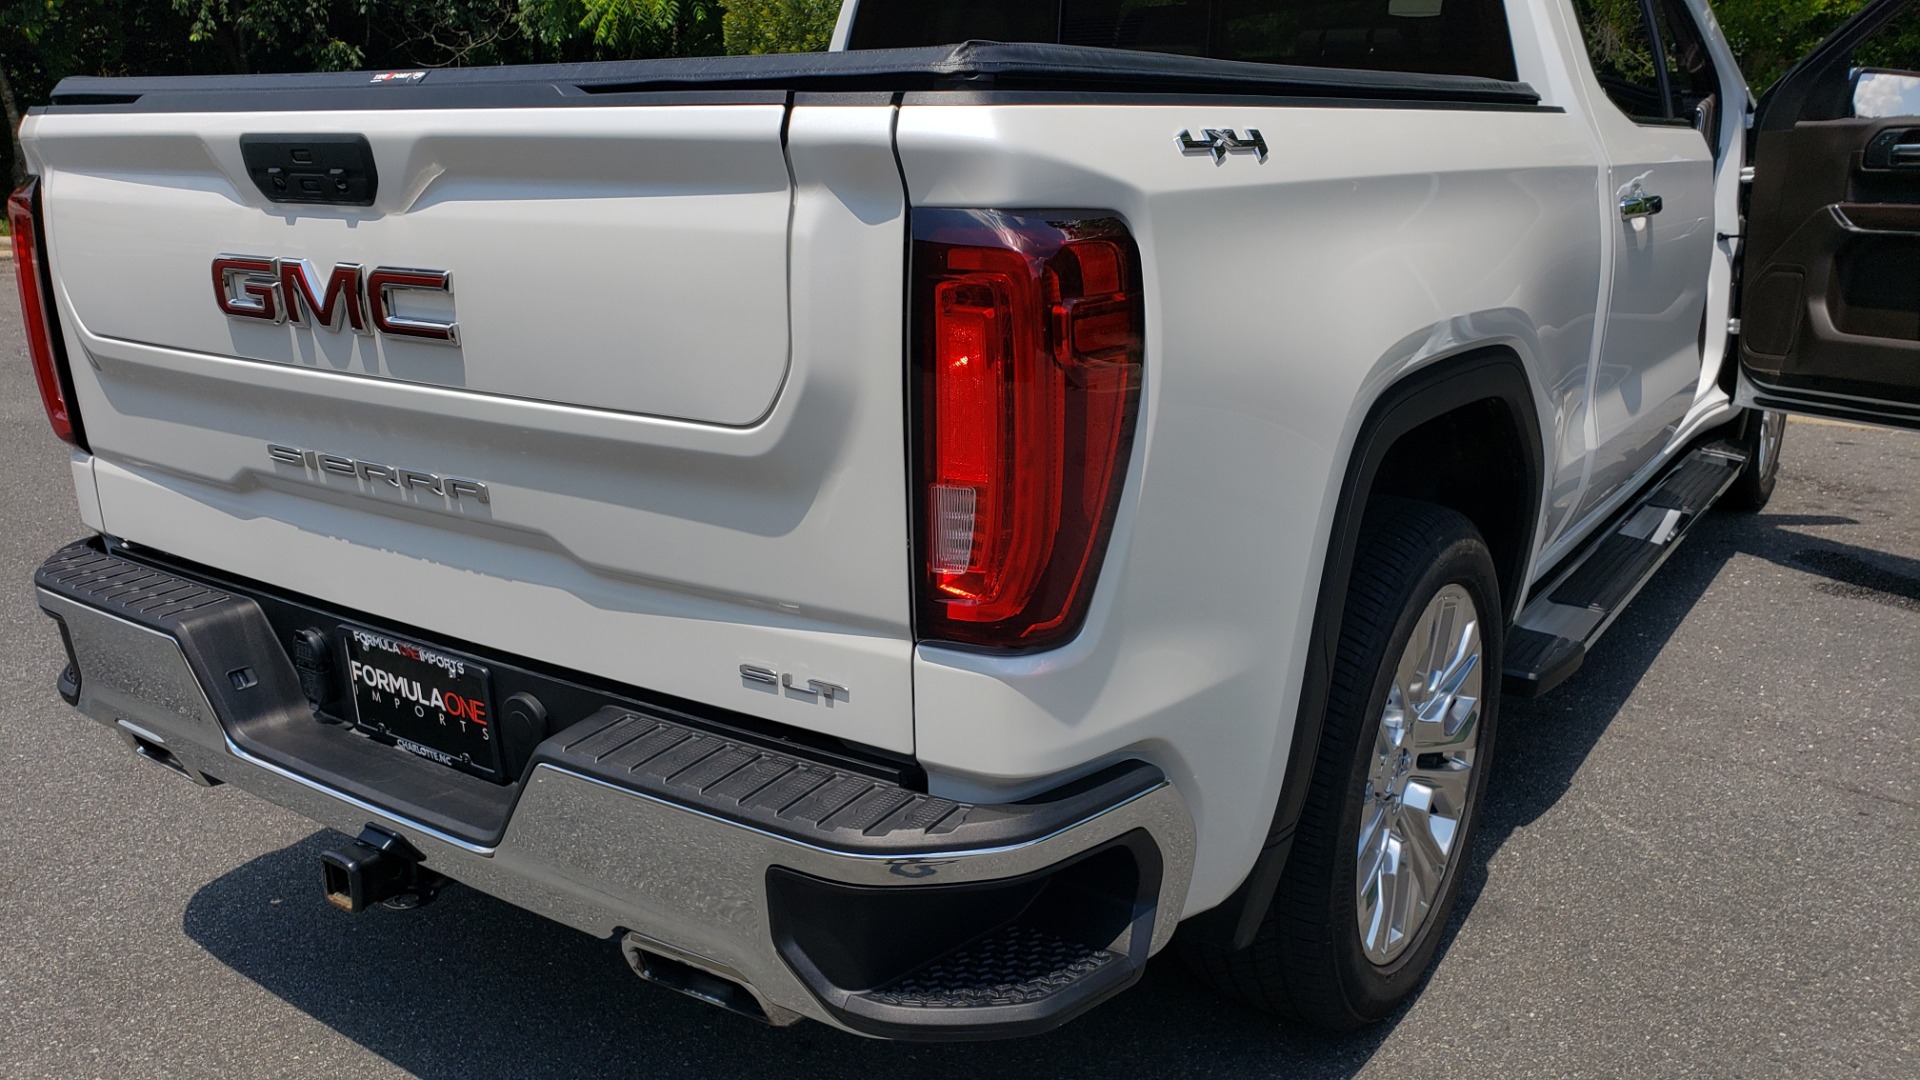 Used 2019 GMC SIERRA 1500 SLT 4WD CREWCAB / PREMIUM / 6.2L V8 / NAV / SUNROOF / VENT SEATS for sale Sold at Formula Imports in Charlotte NC 28227 33